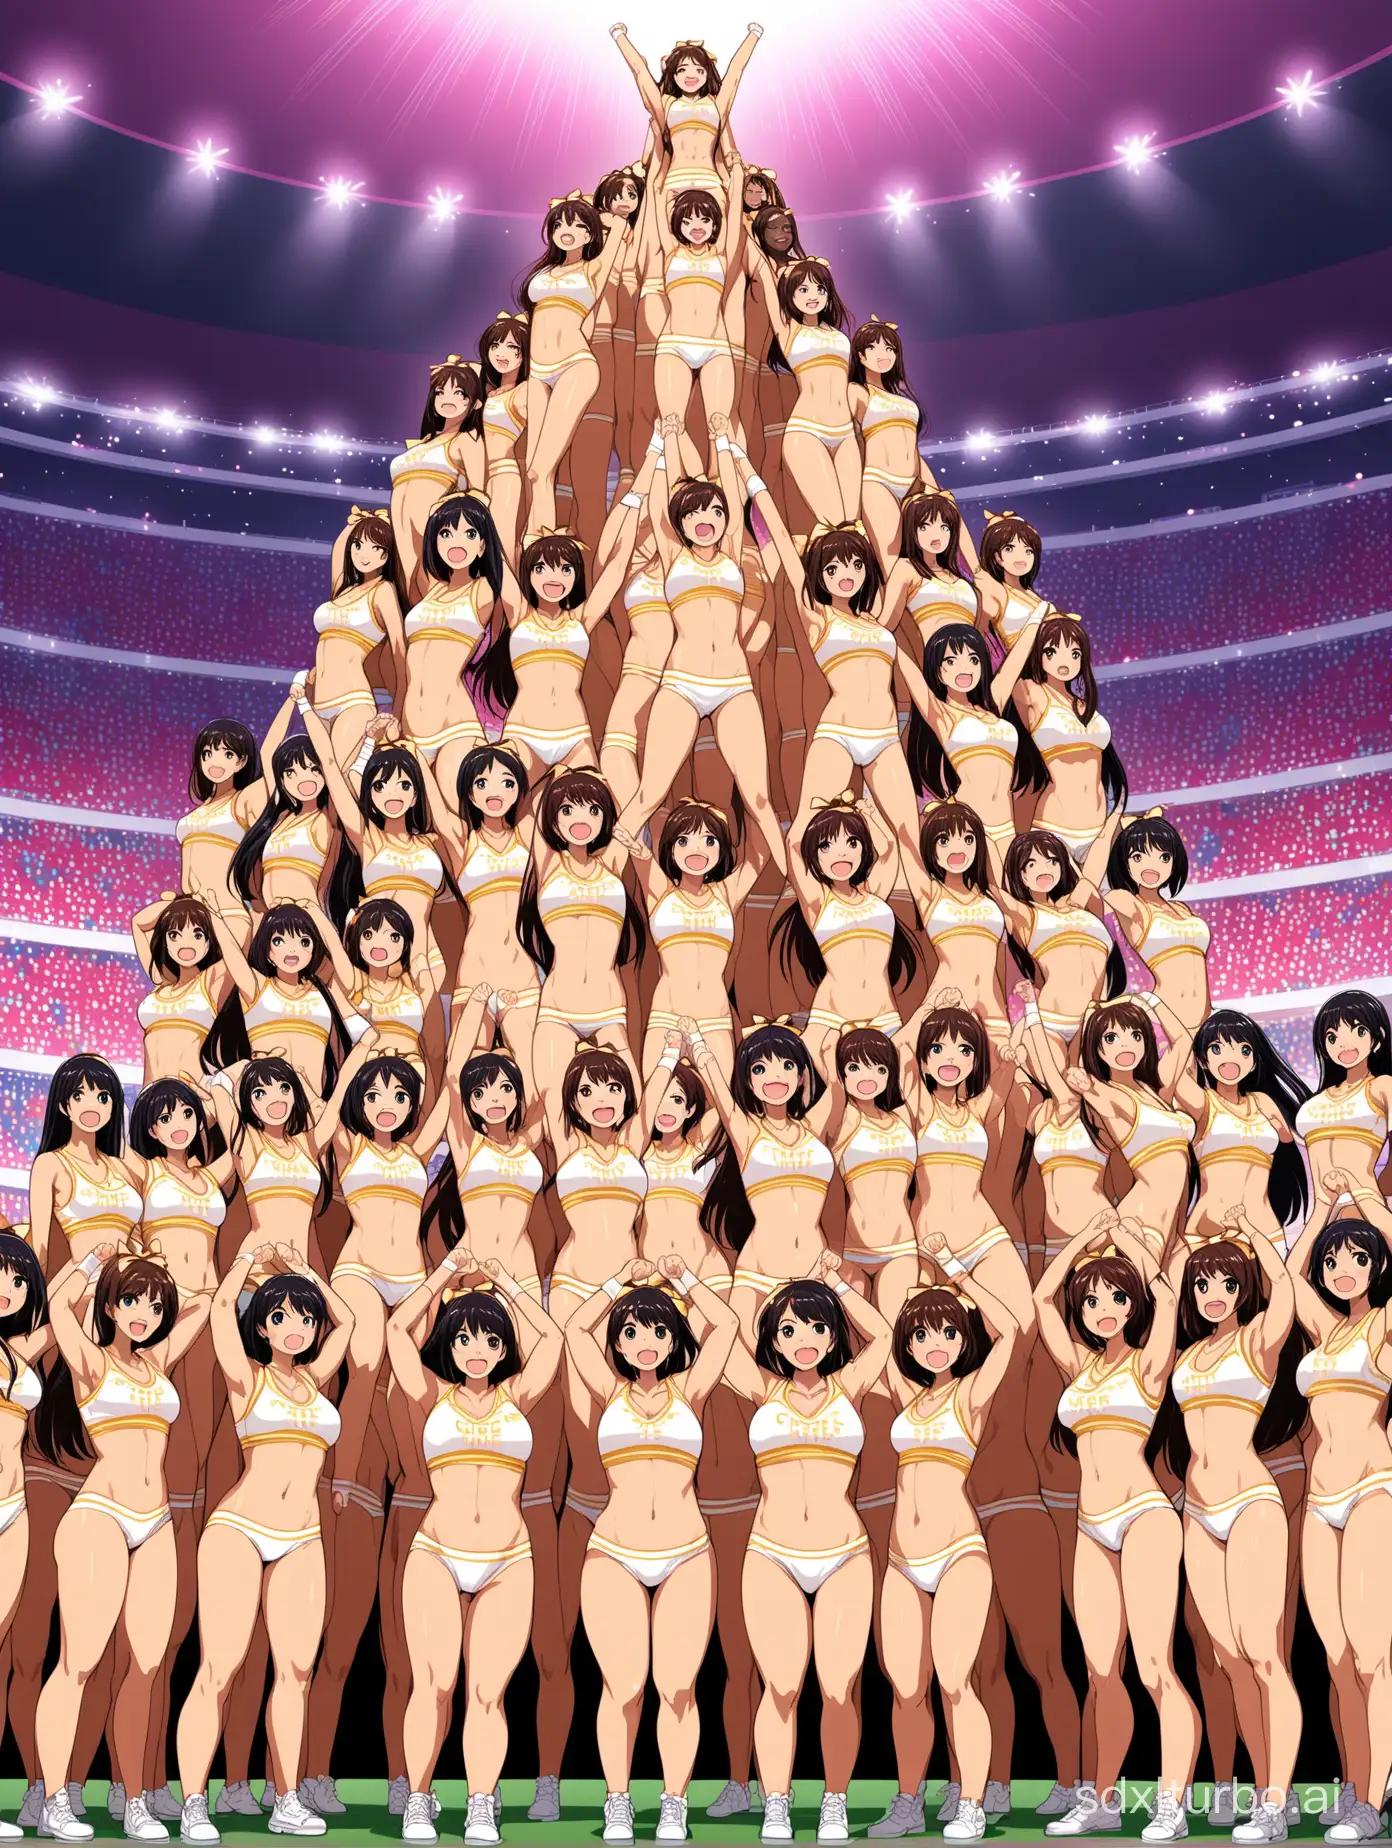 tiny woman cheers on top of a diverse group of nude fitness models in a cheerleader pyramid competition, a tall human tower, in modern anime style